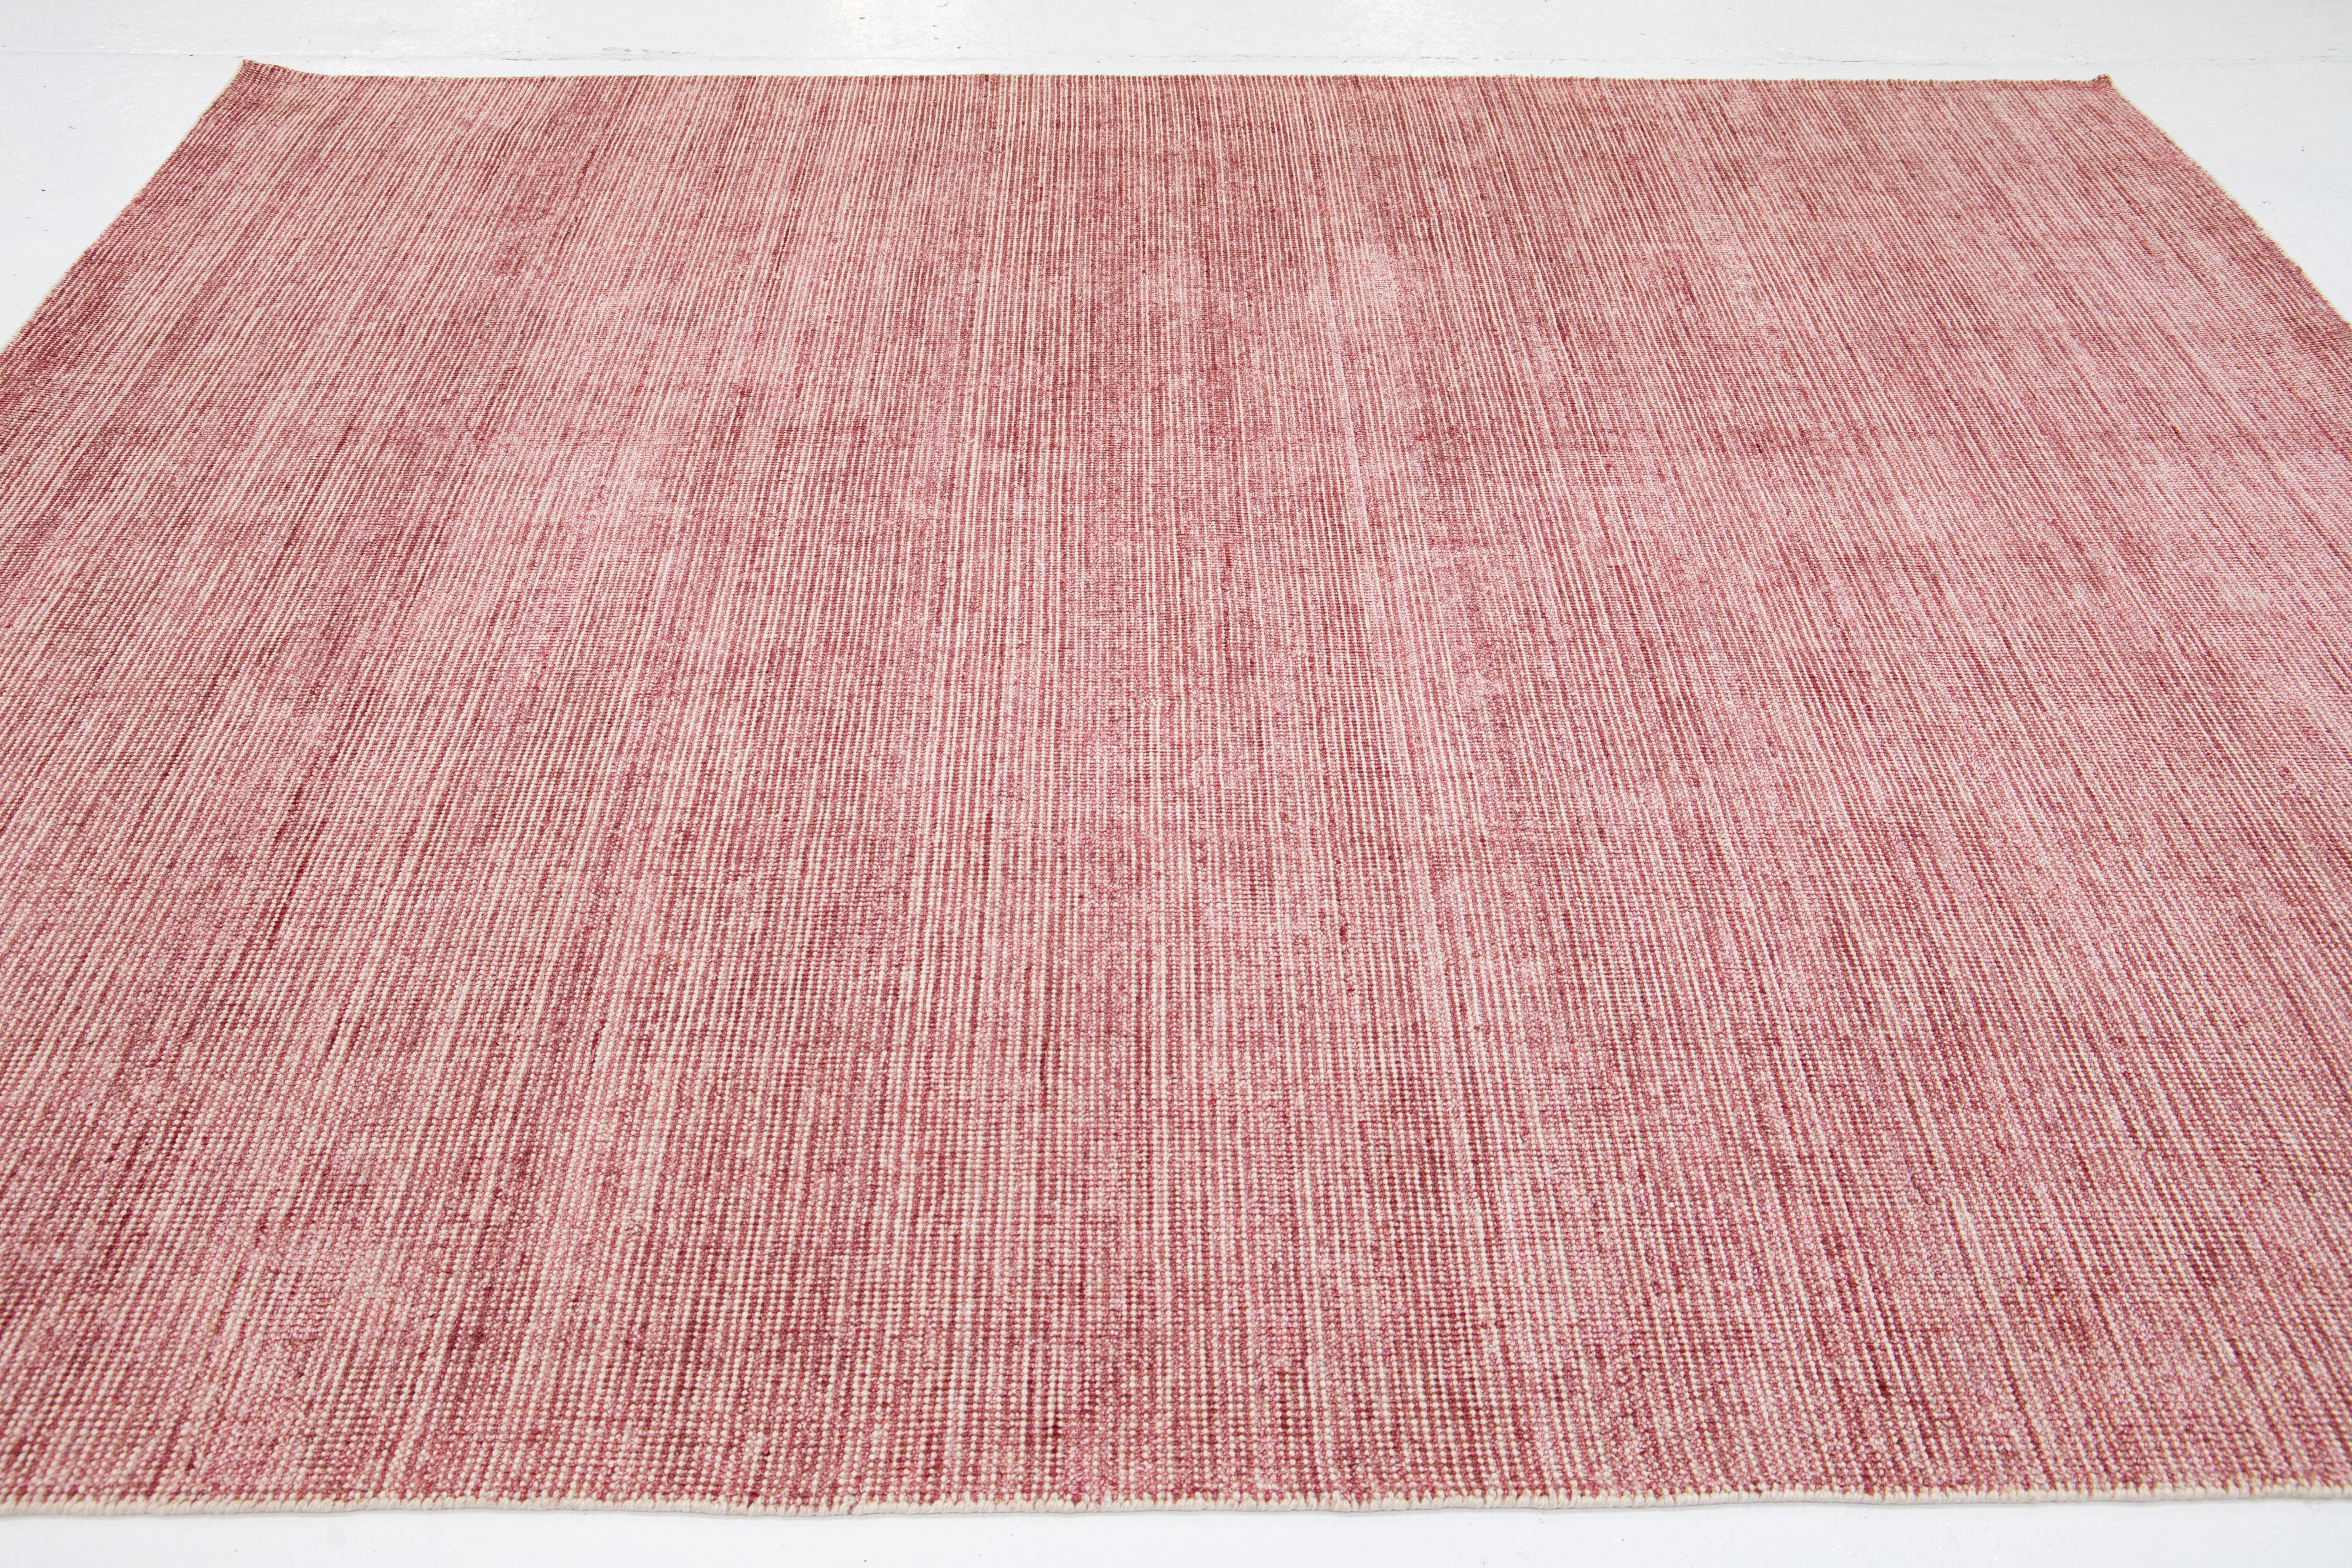 Beautiful Apadana's handmade bamboo/silk & wool Indian groove rug with a red field. This groove collection rug has an all-over design.

This rug measures 8' x 10'.

Custom colors and sizes are available upon request.

